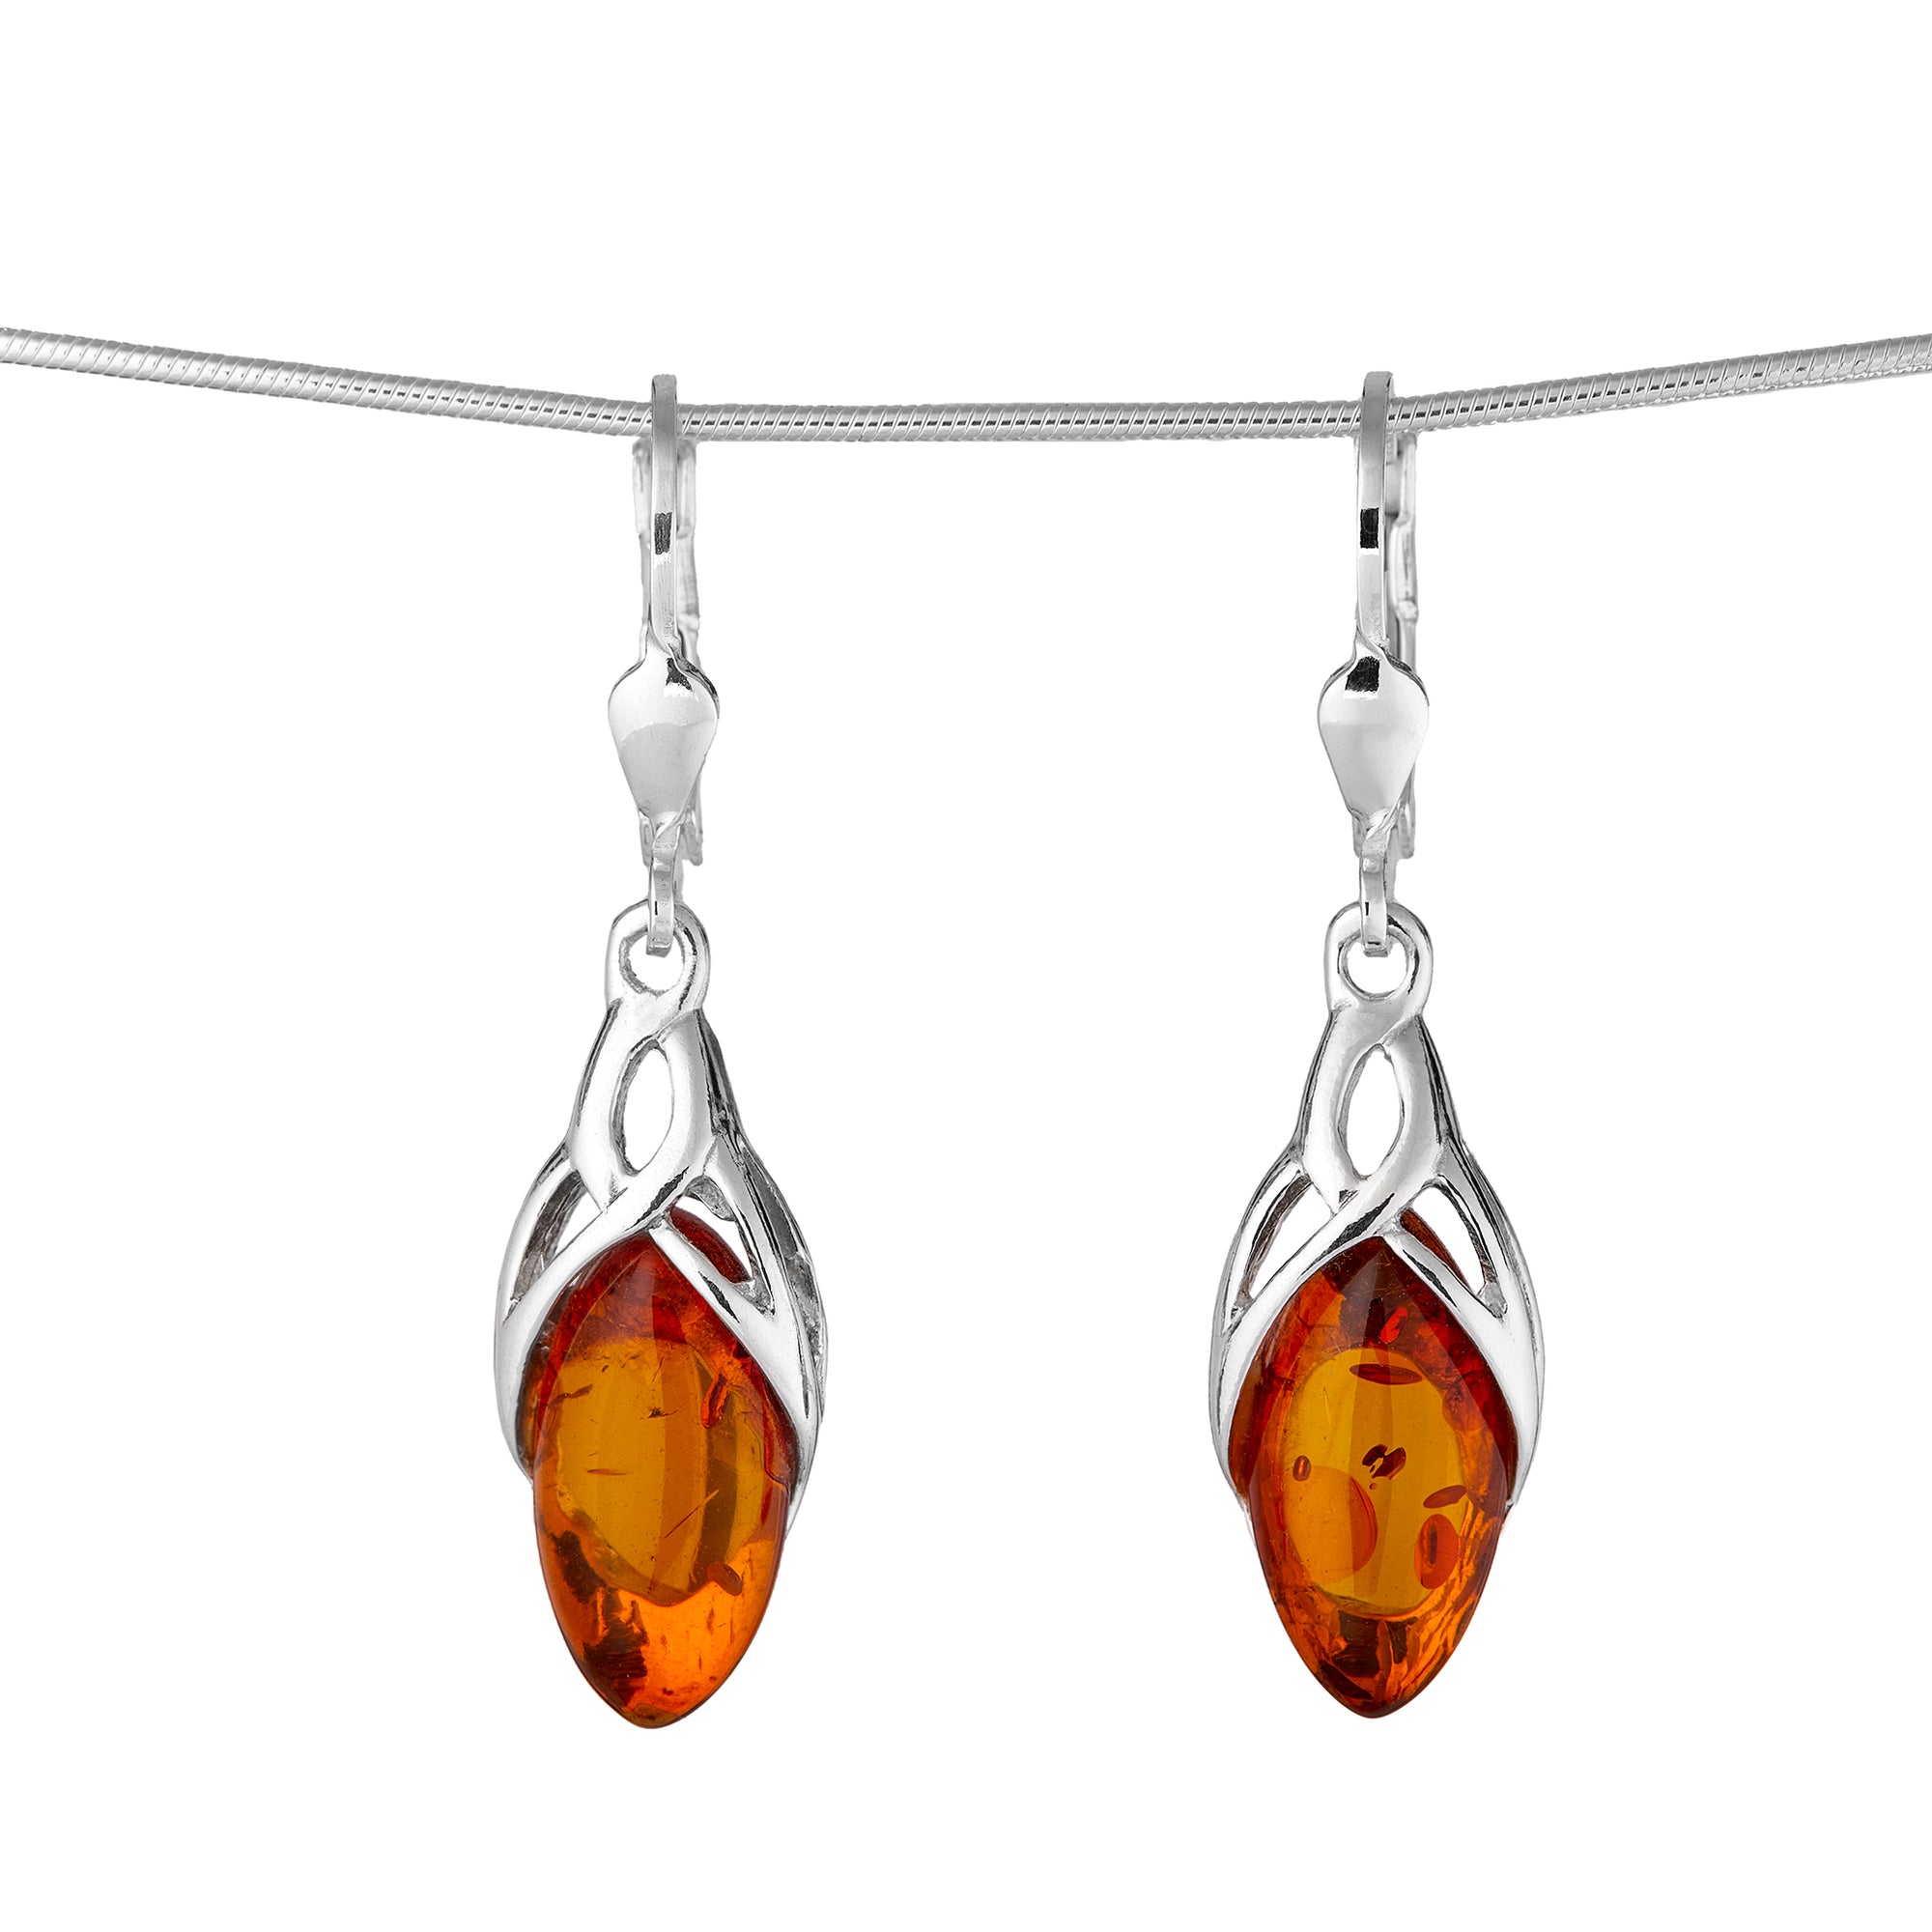 Amber earrings with Celtic knot